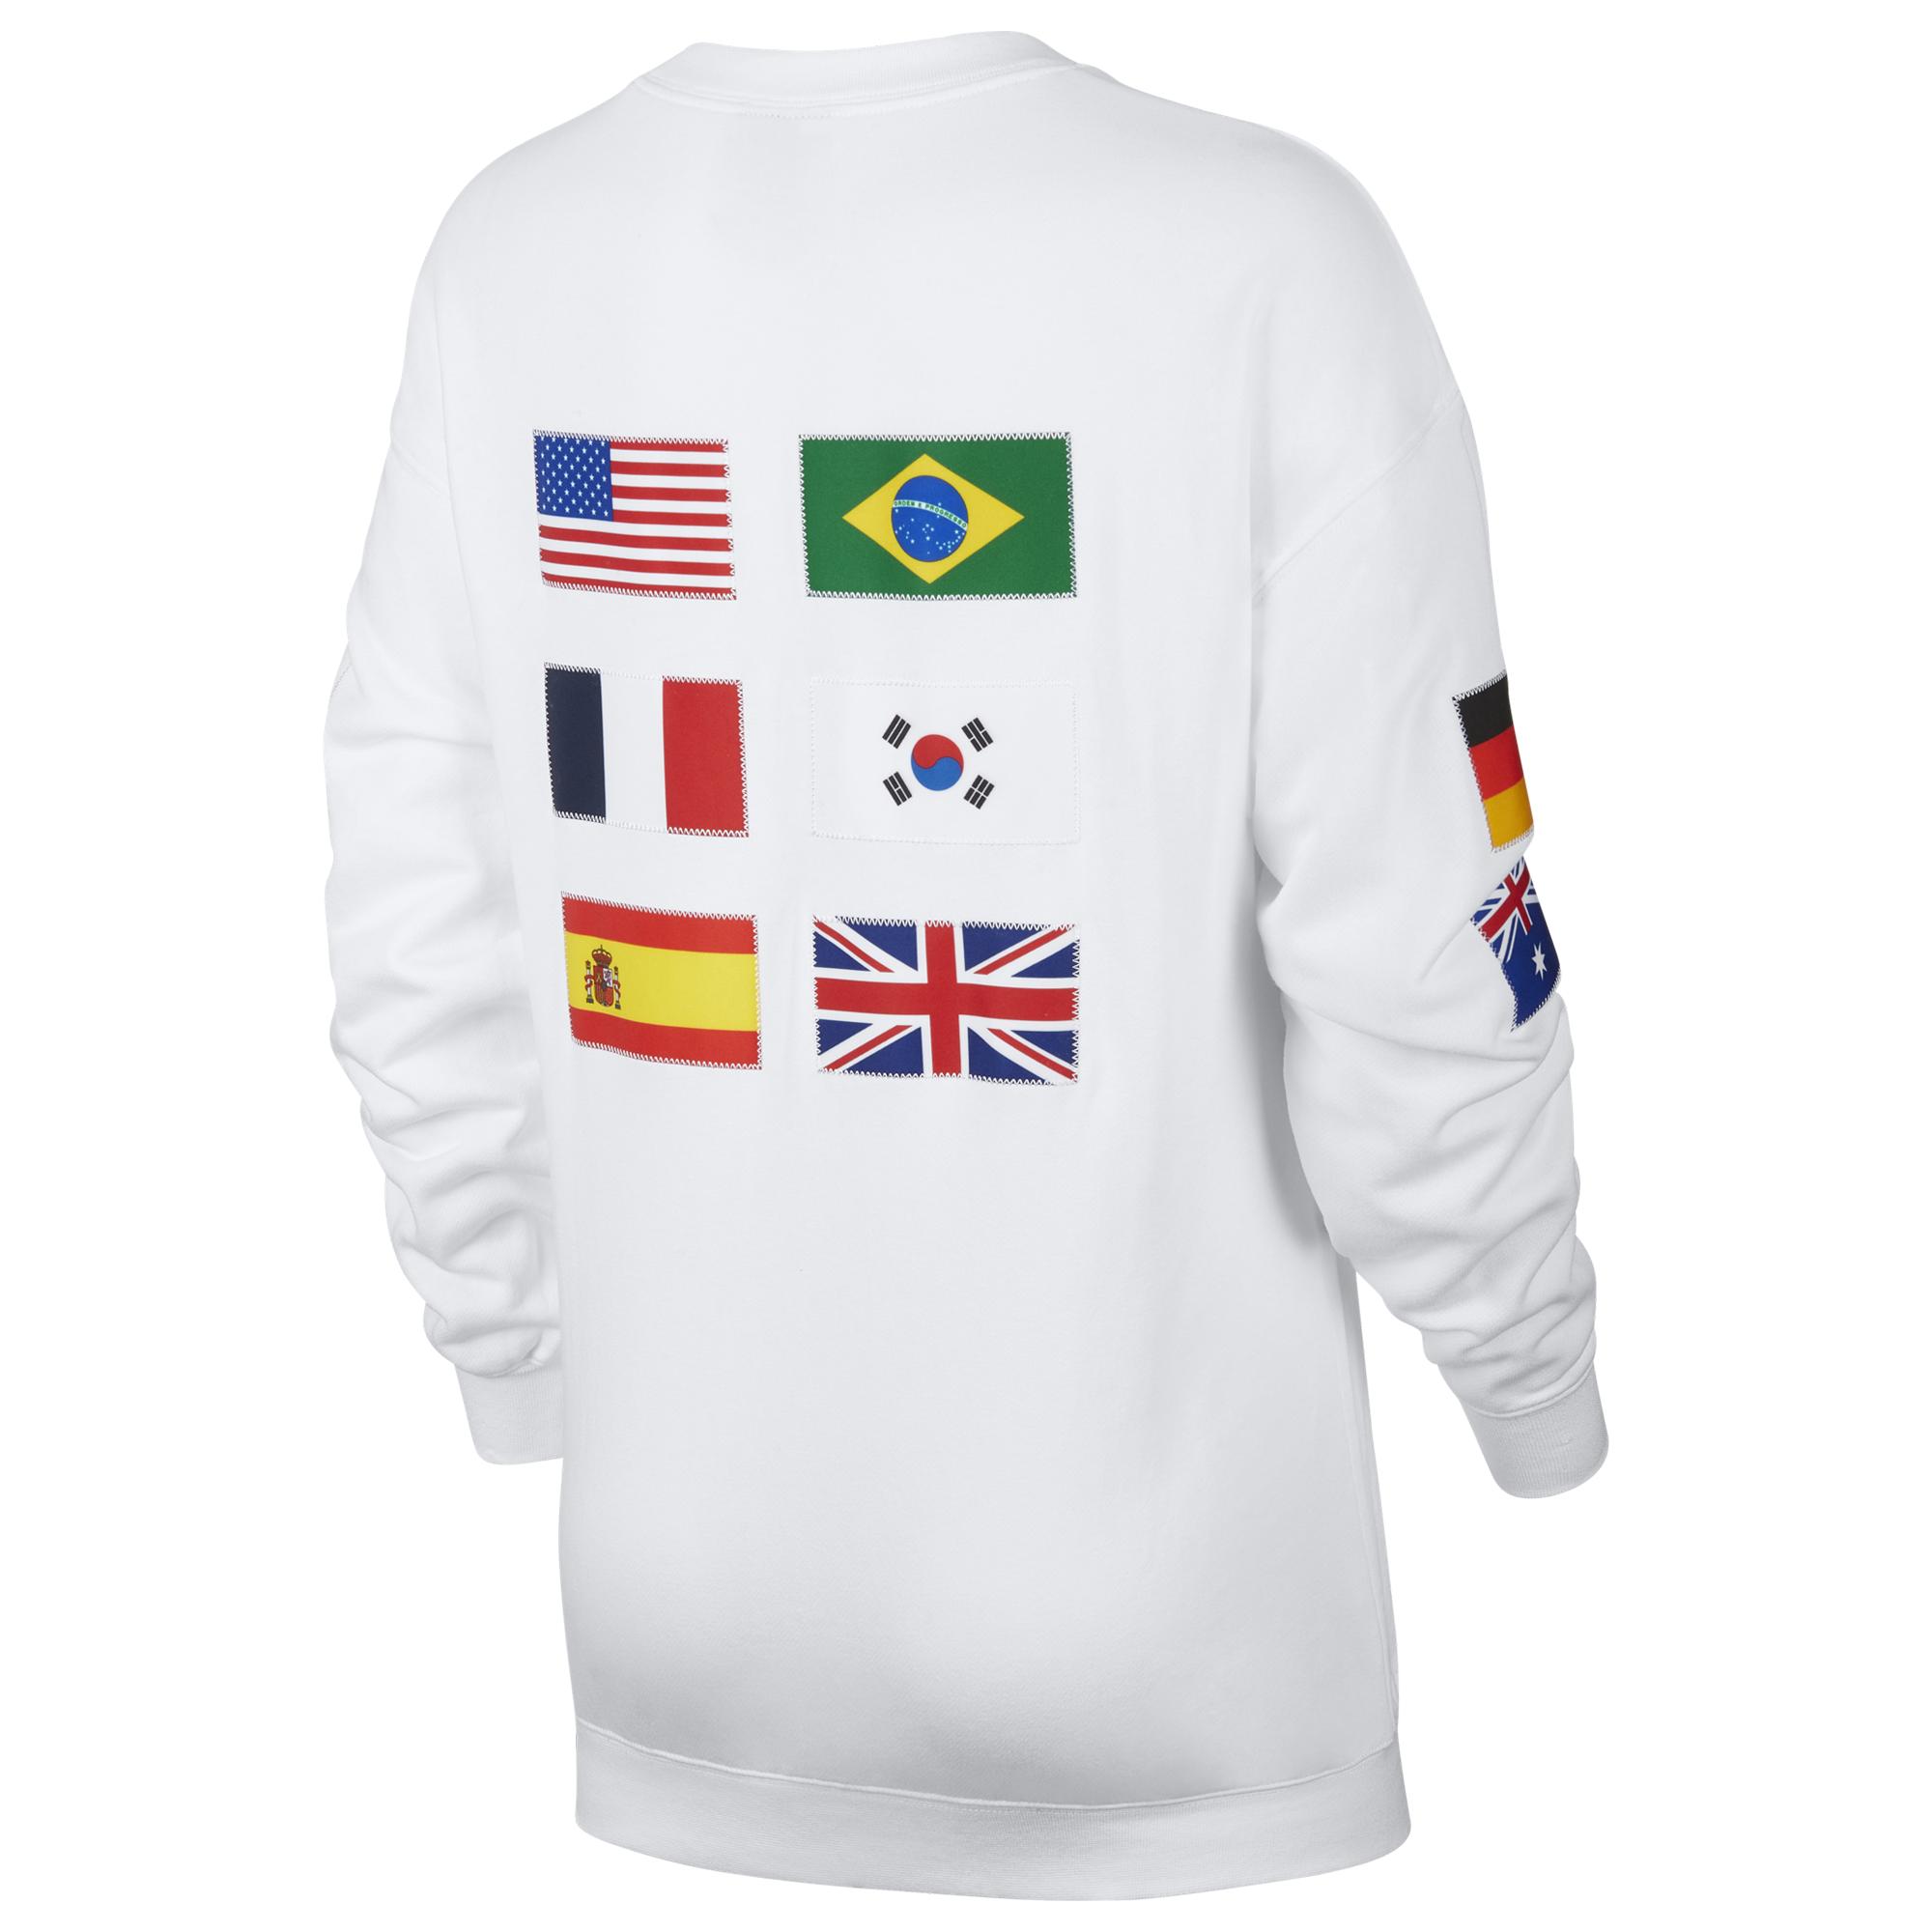 Nike Cotton Flags French Terry Crewneck Sweater in White - Lyst